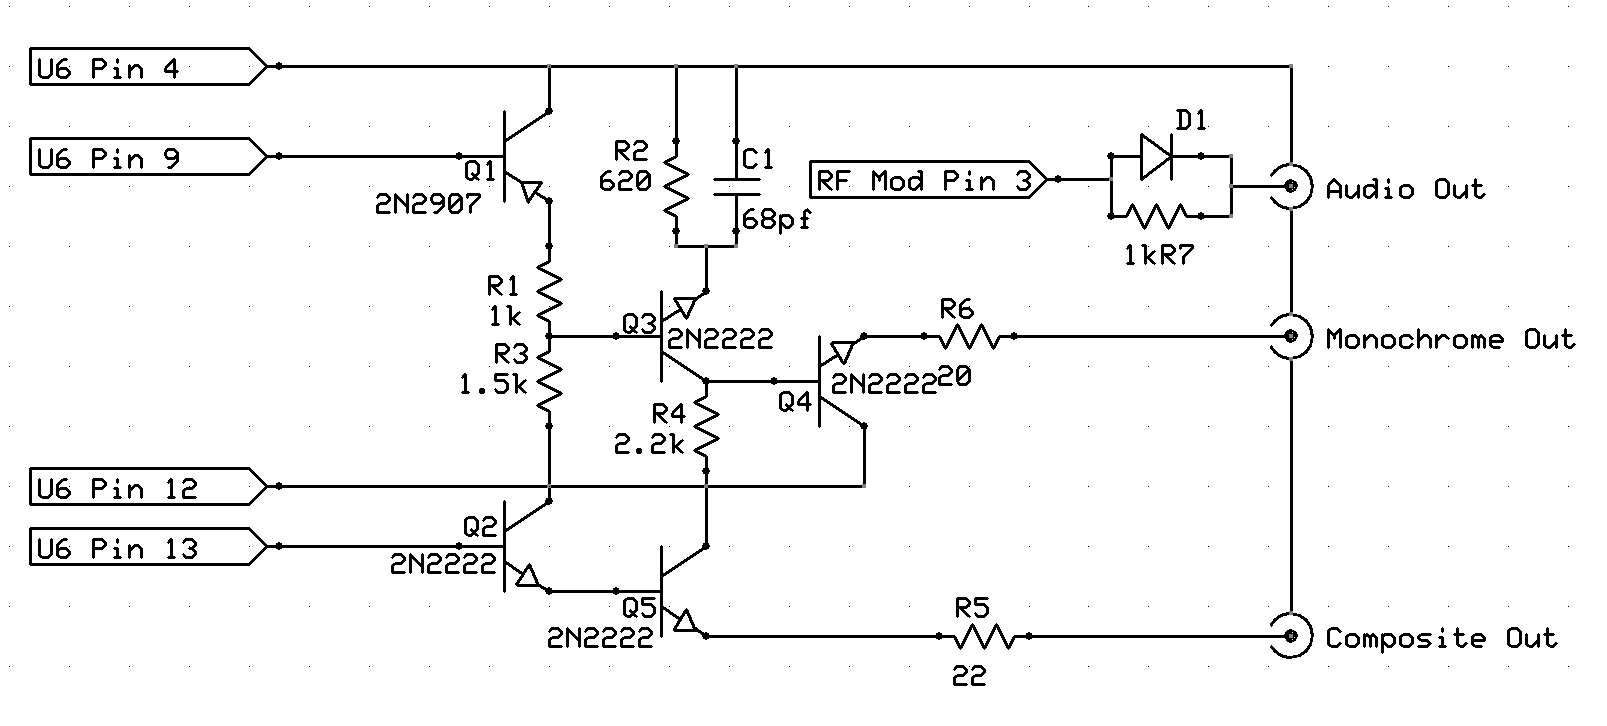 Other Bob Composite Video Schematic